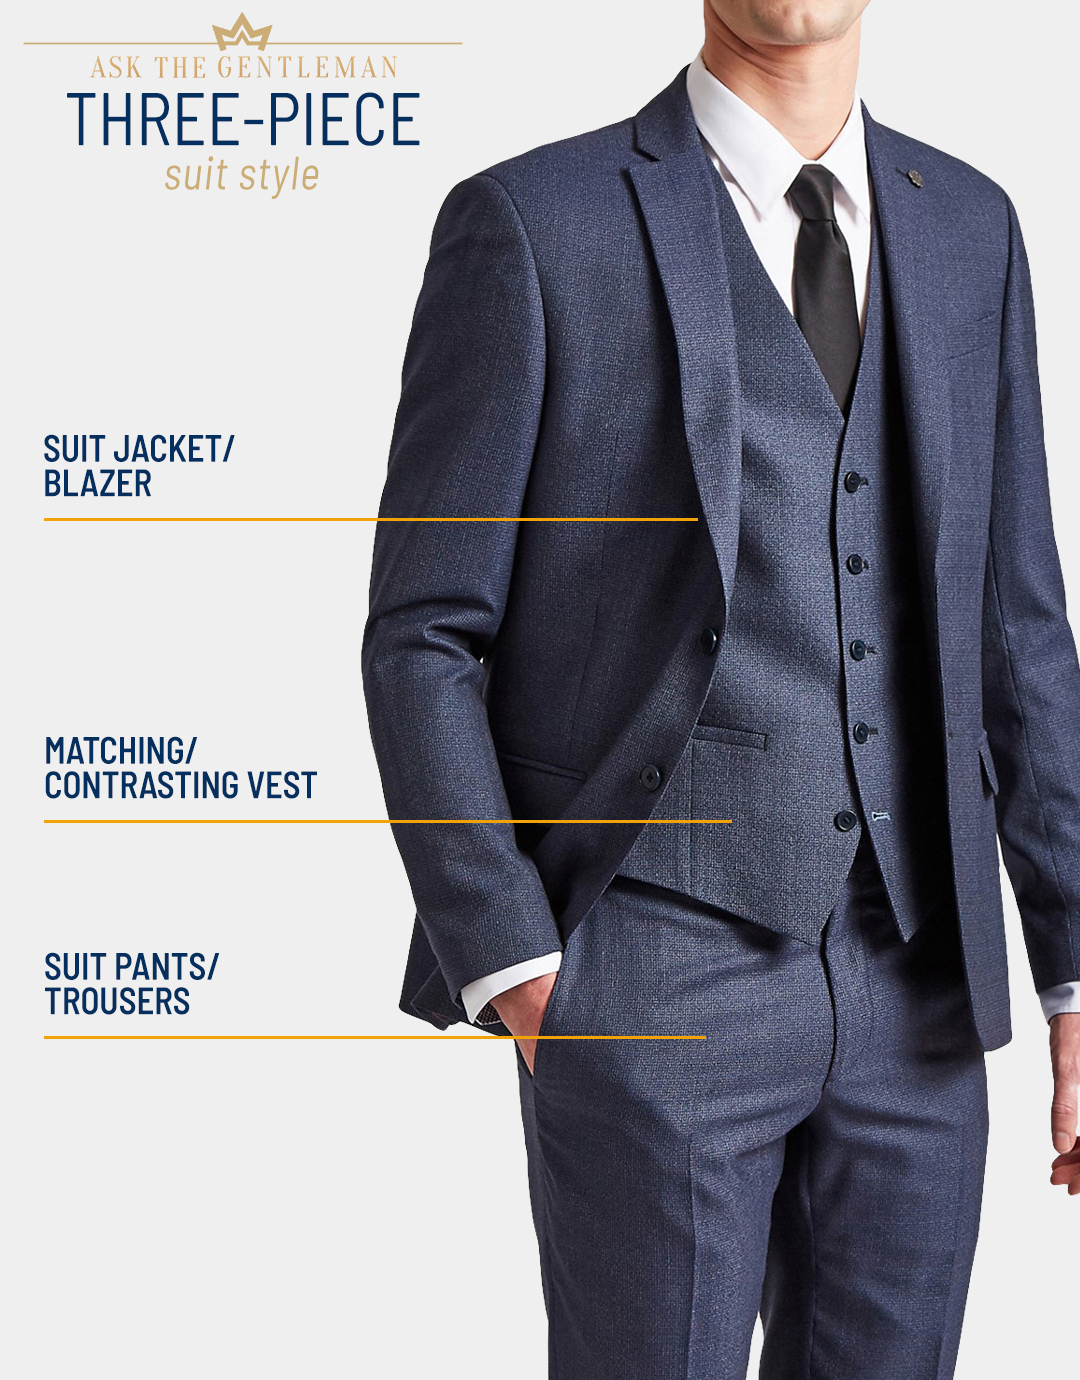 What is a three-piece suit